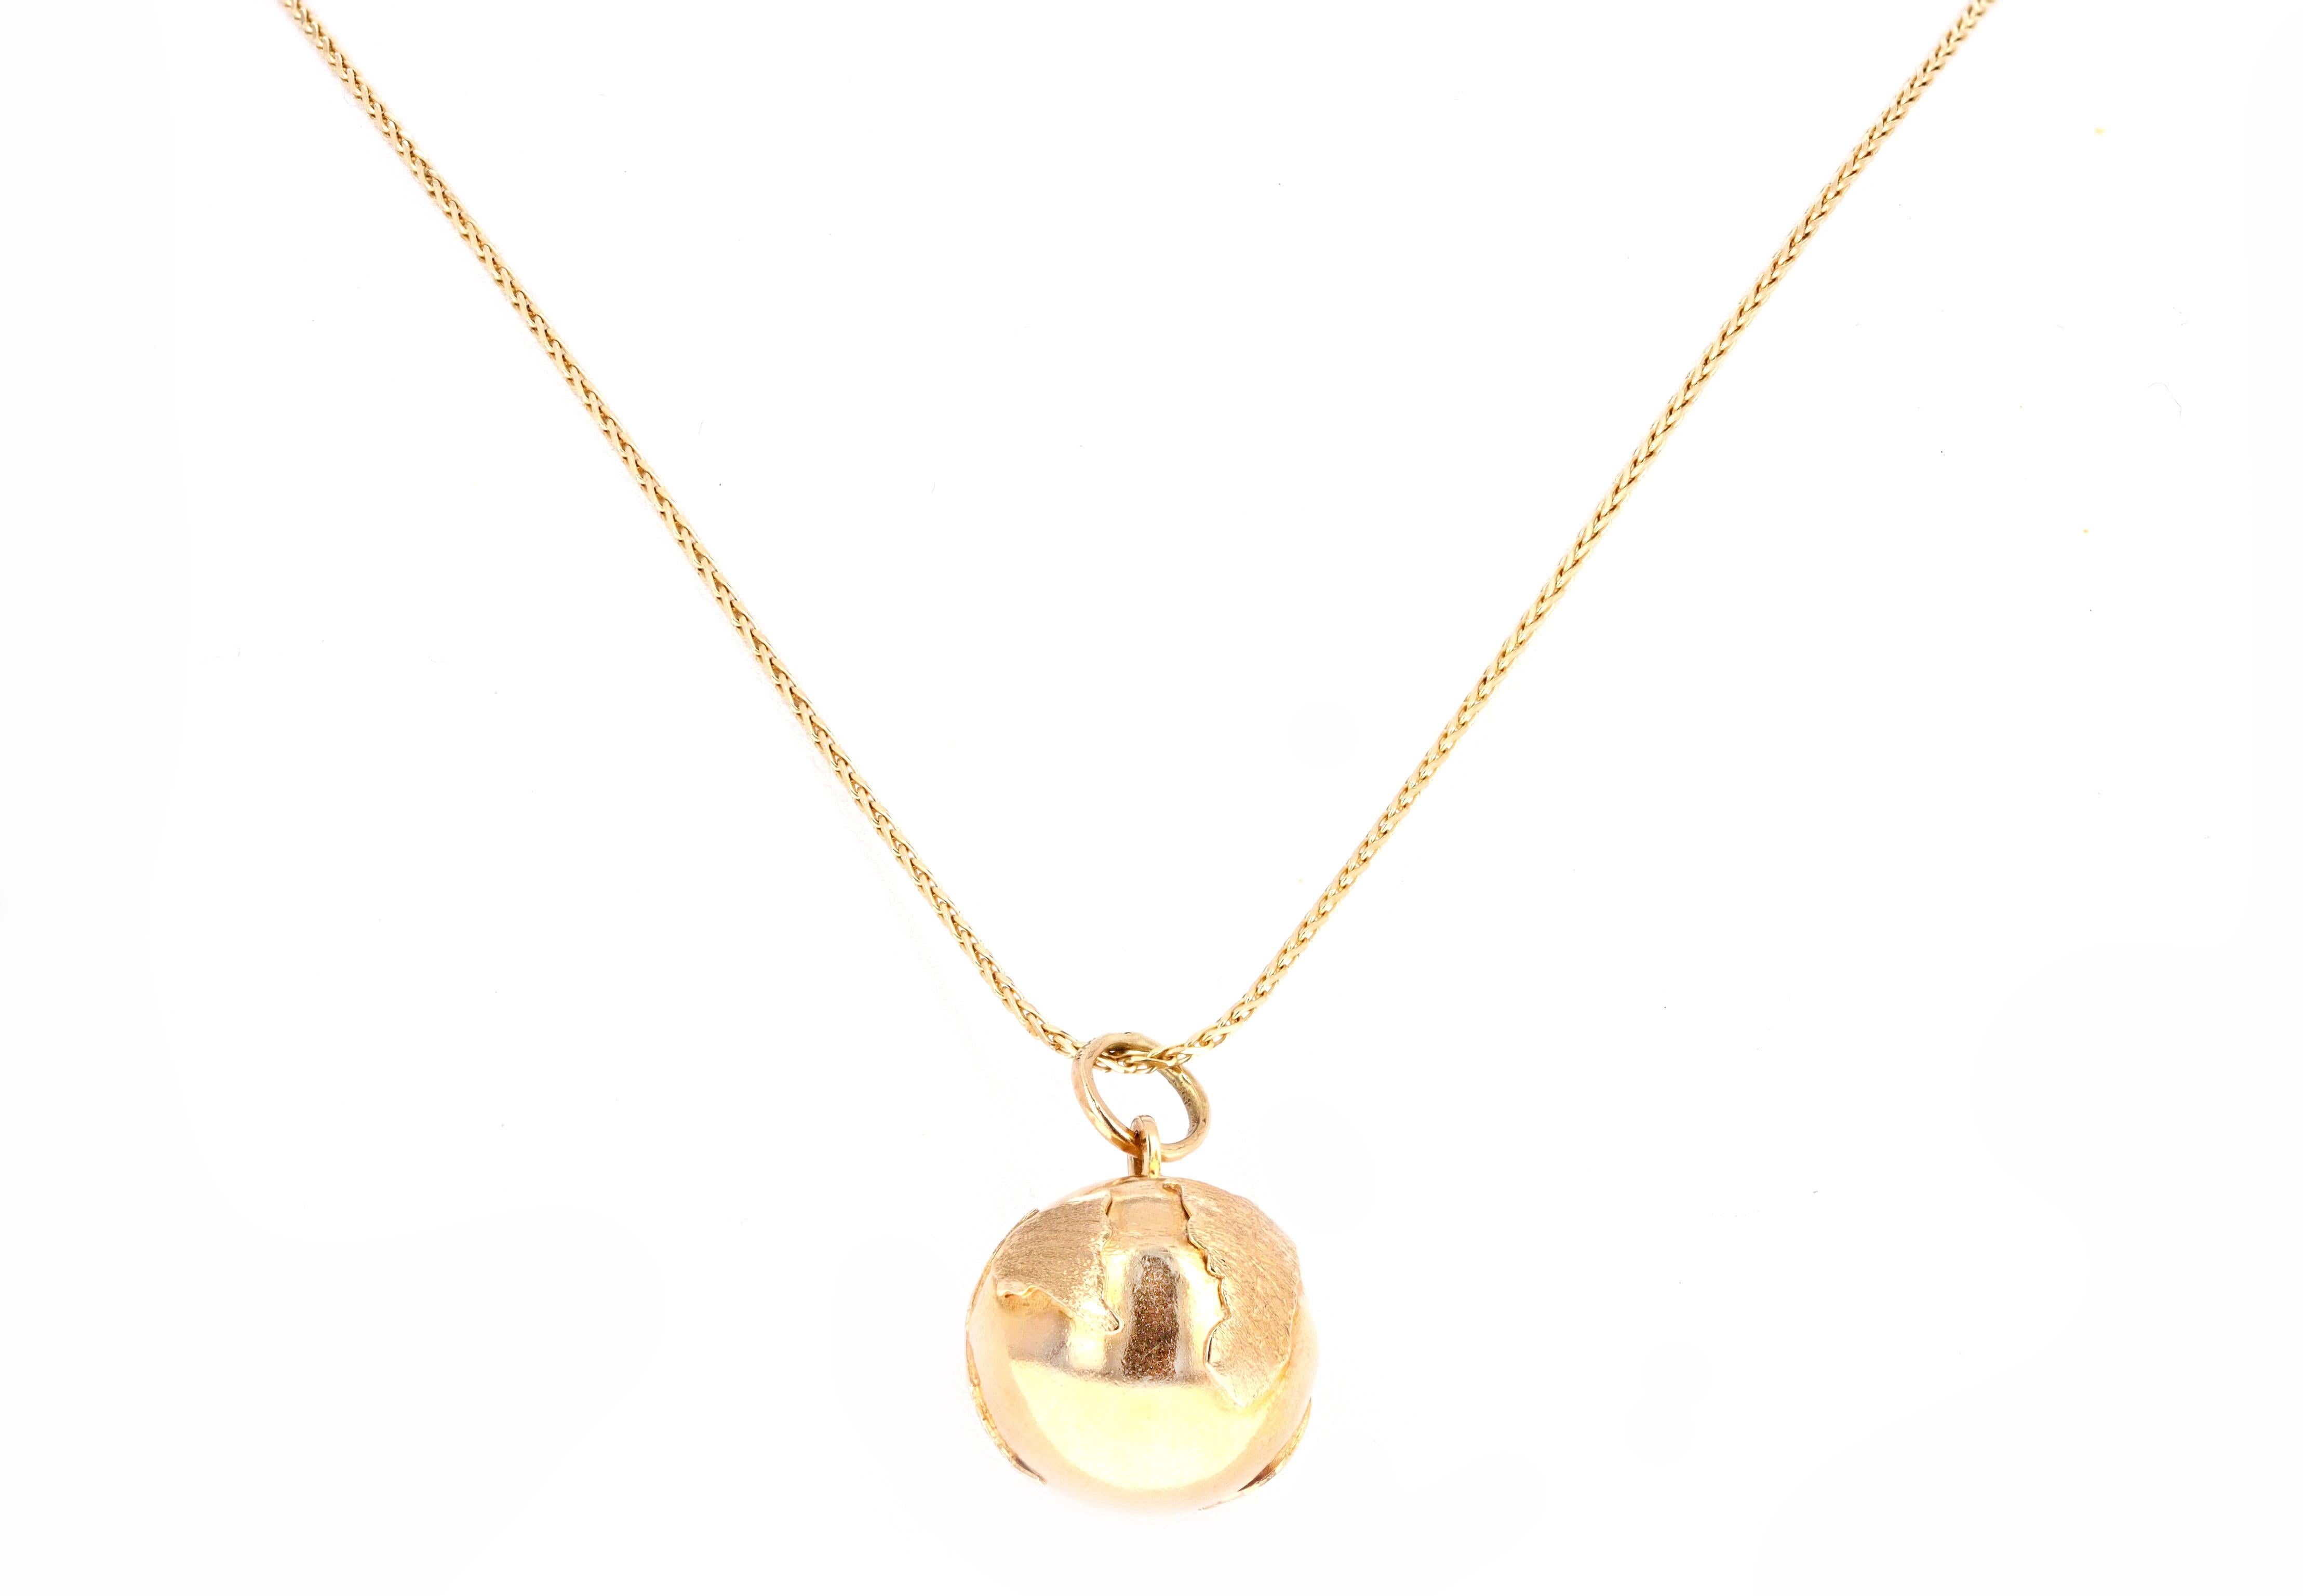 Era: Vintage Estate

Composition: 14K Yellow Gold

Pendant Dimensions: 20mm x 20mm(excluding bail)

Necklace Length: 18 Inches

Necklace Weight: 11.7 Grams

Item Barcode: 129014